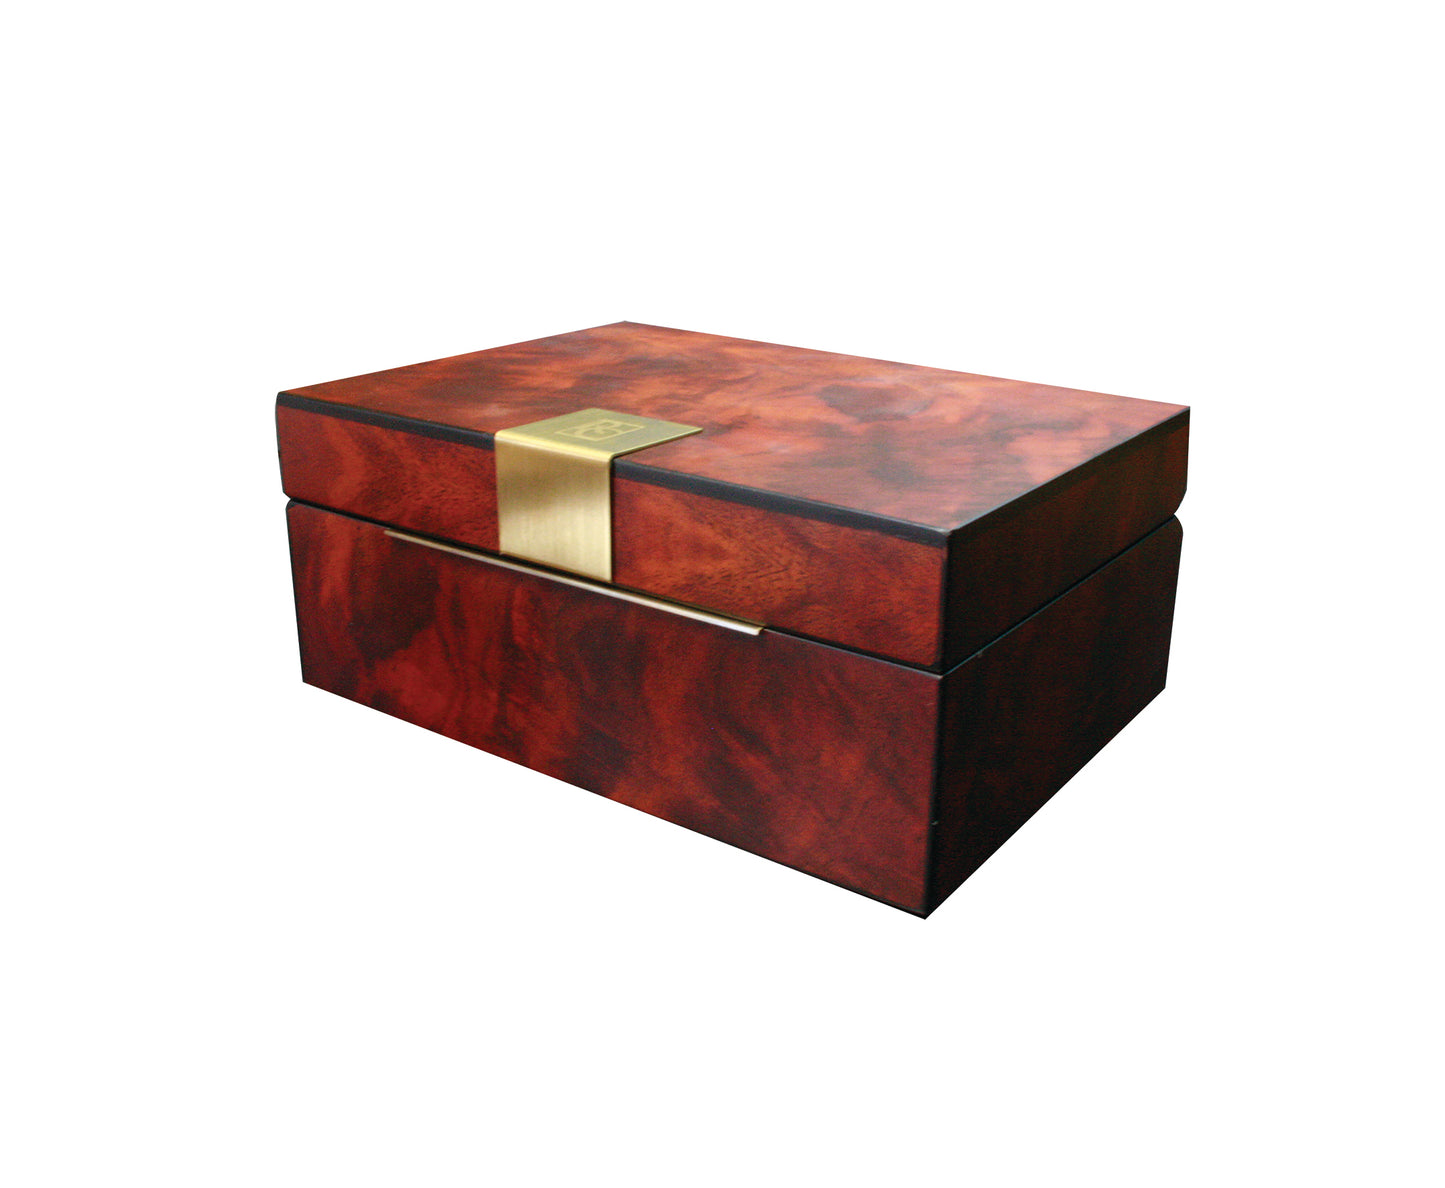 Wooden Presentation Box for Solid Bronze Sculpture by Keith Sherwin